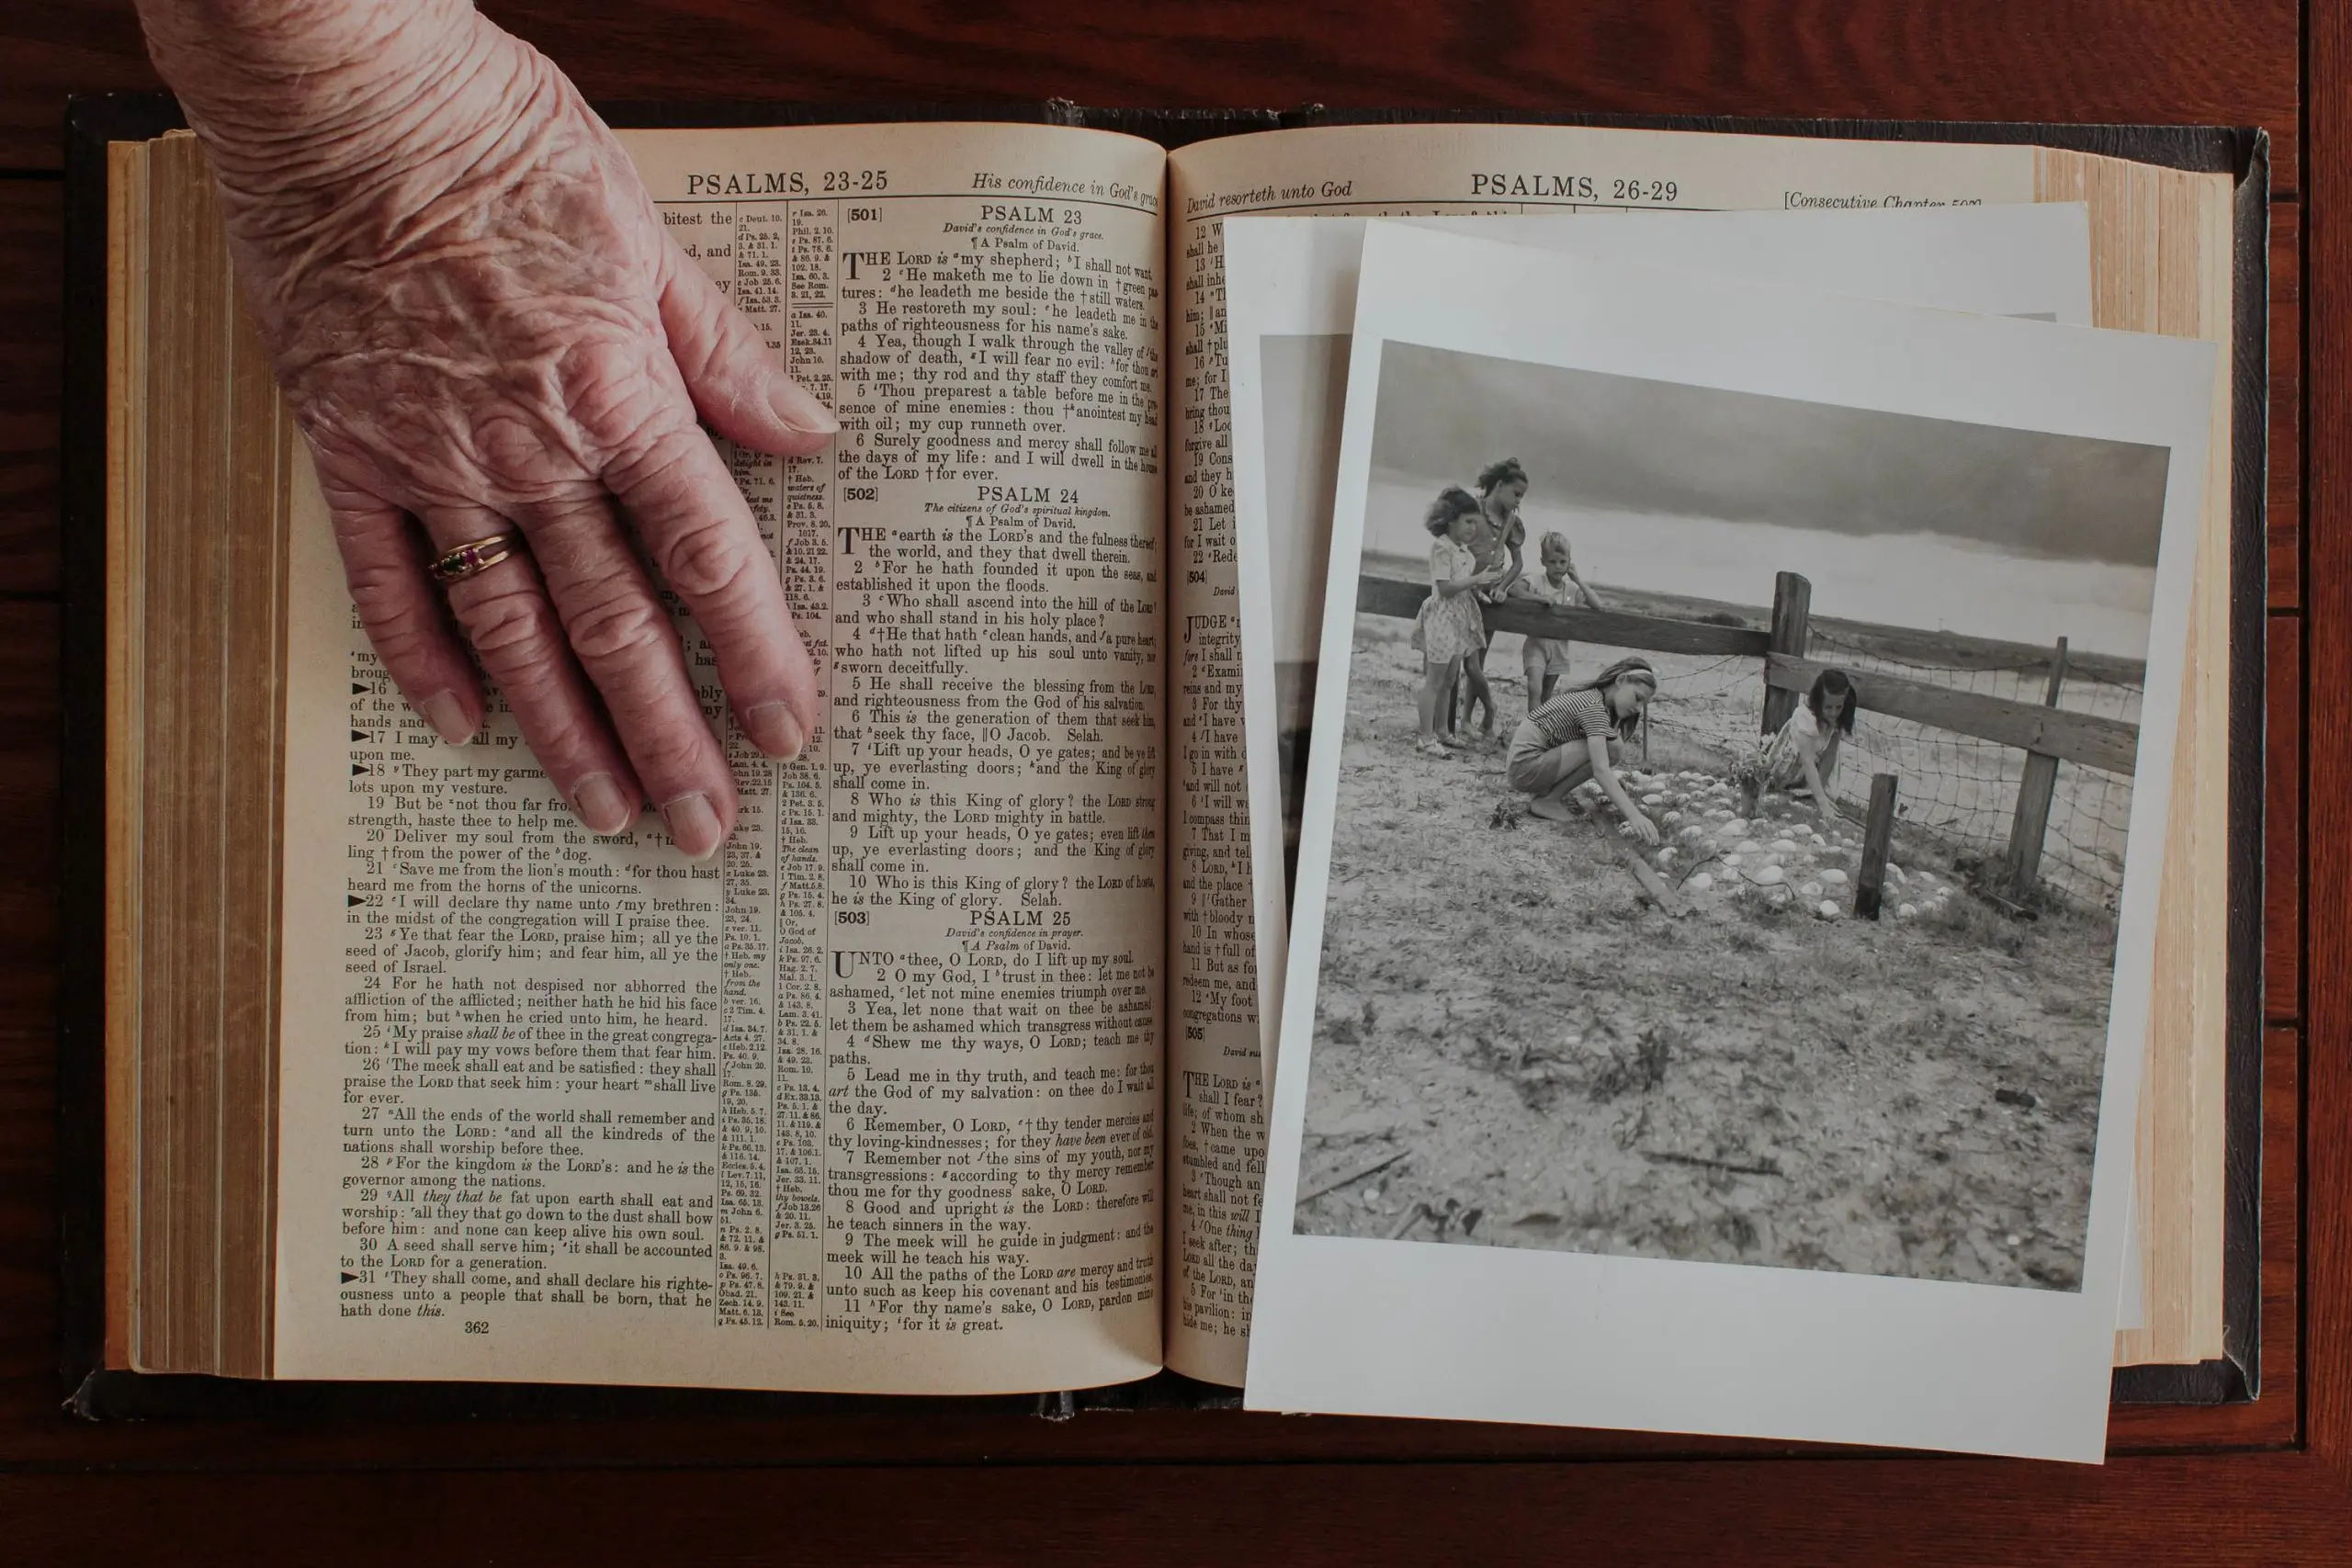 Woman places hand over old photographs and Bible